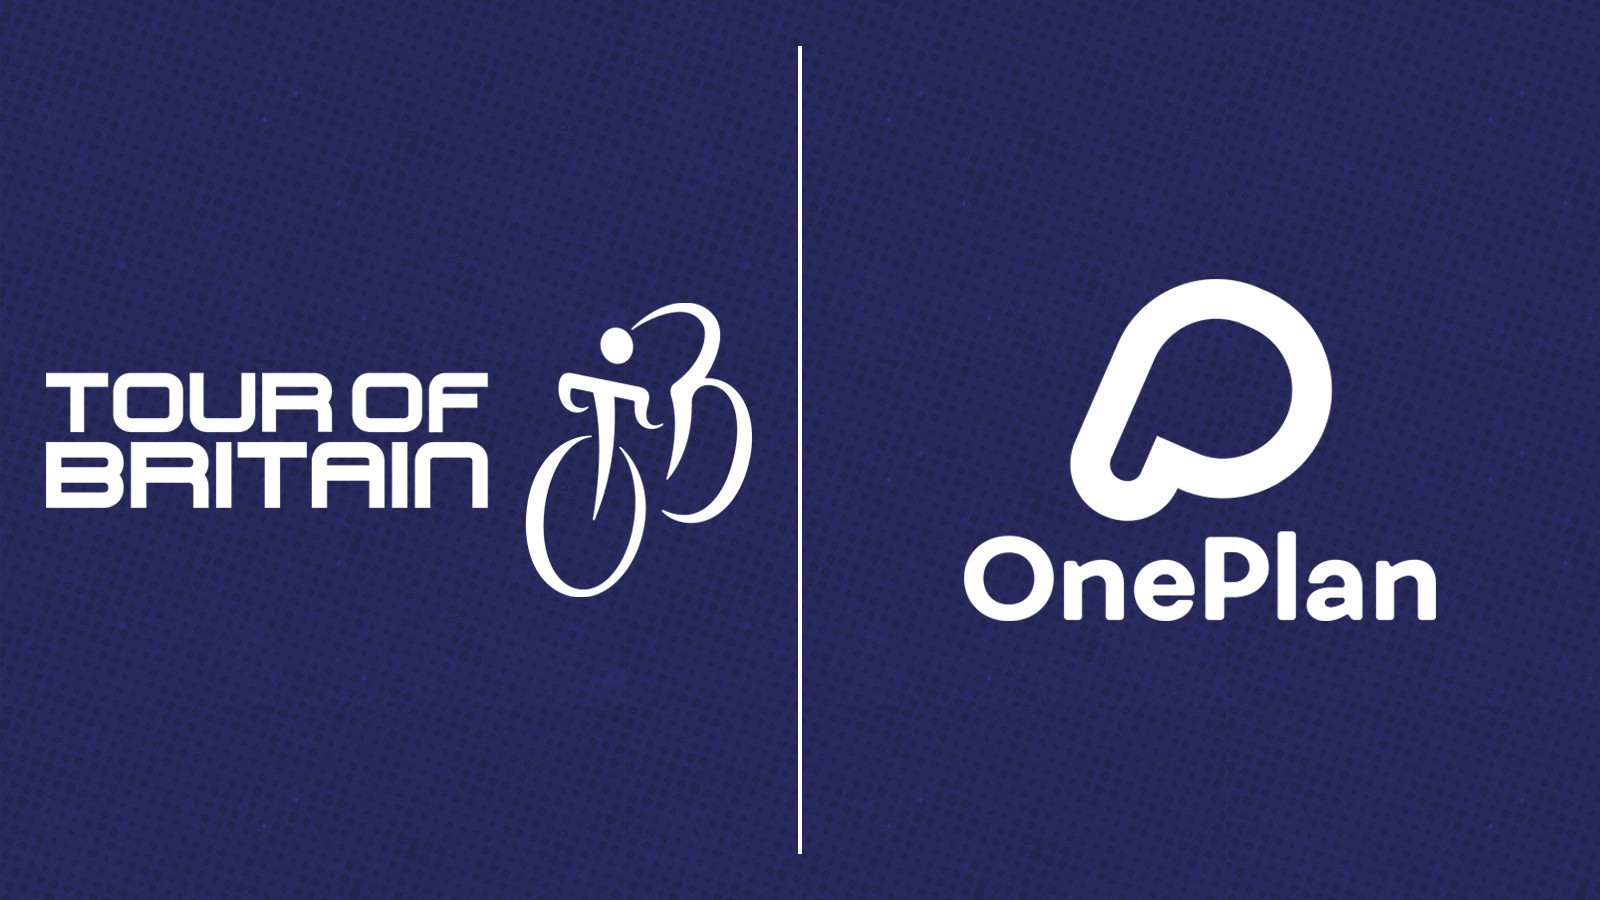 OnePlan has been appointed as event planning suppliers for this year's editions of the Tour of Britain and Women's Tour ©Tour of Britain